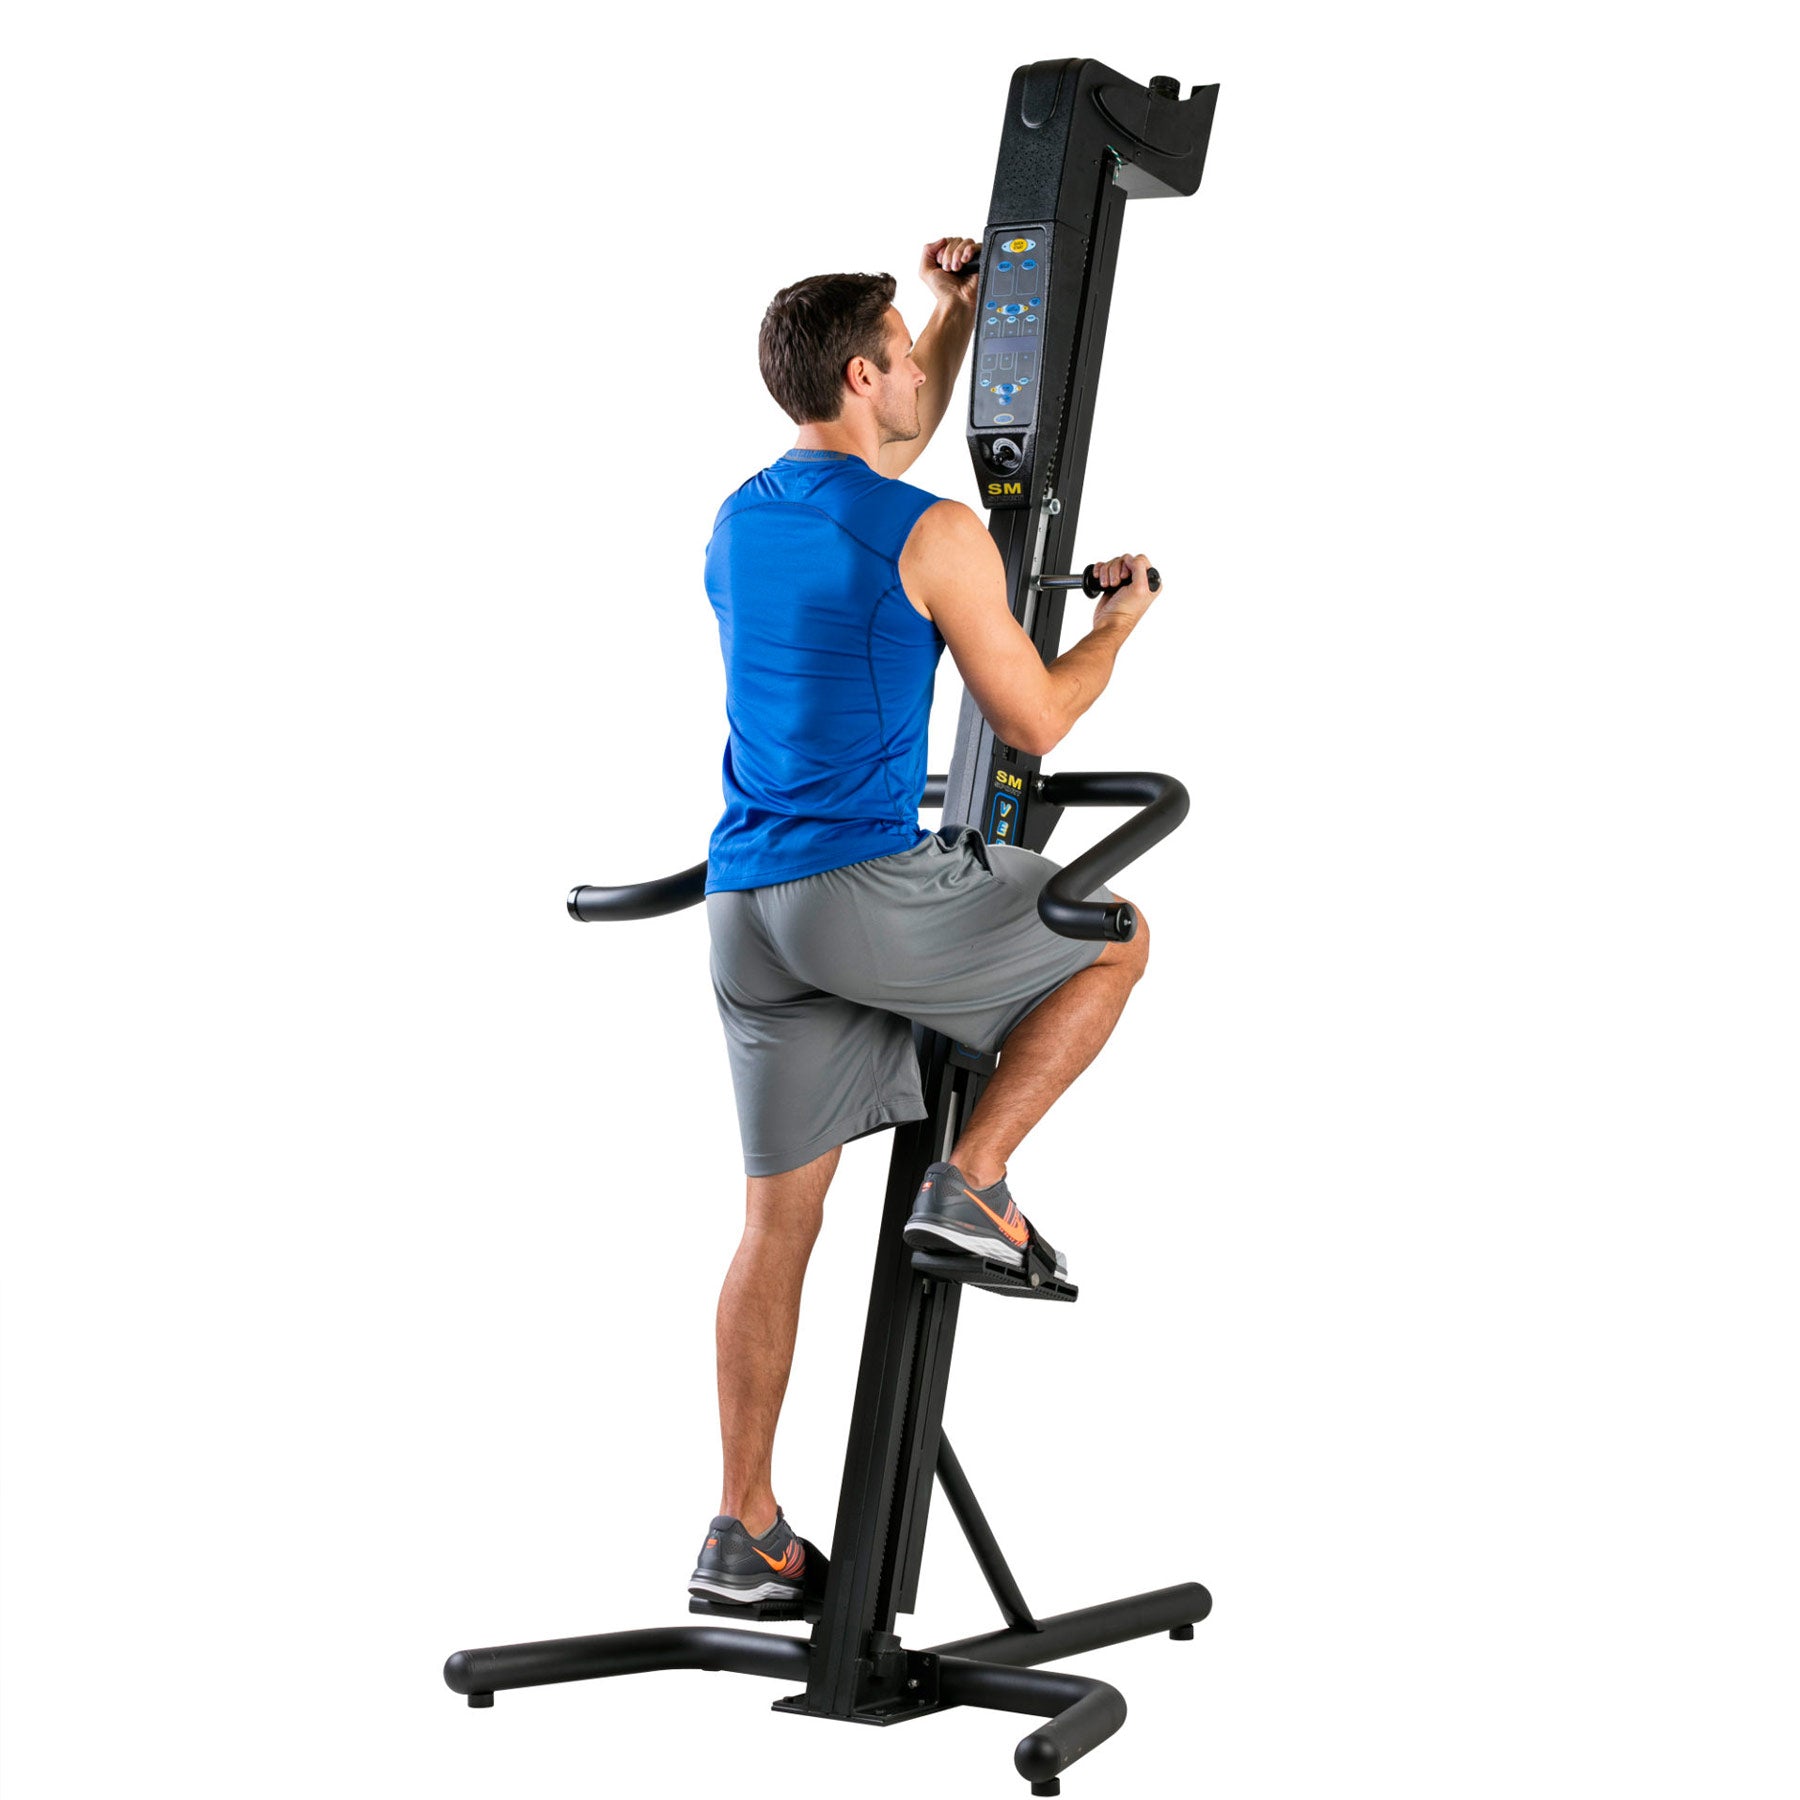 a man exercising on the versaclimber sport fitness gym machine